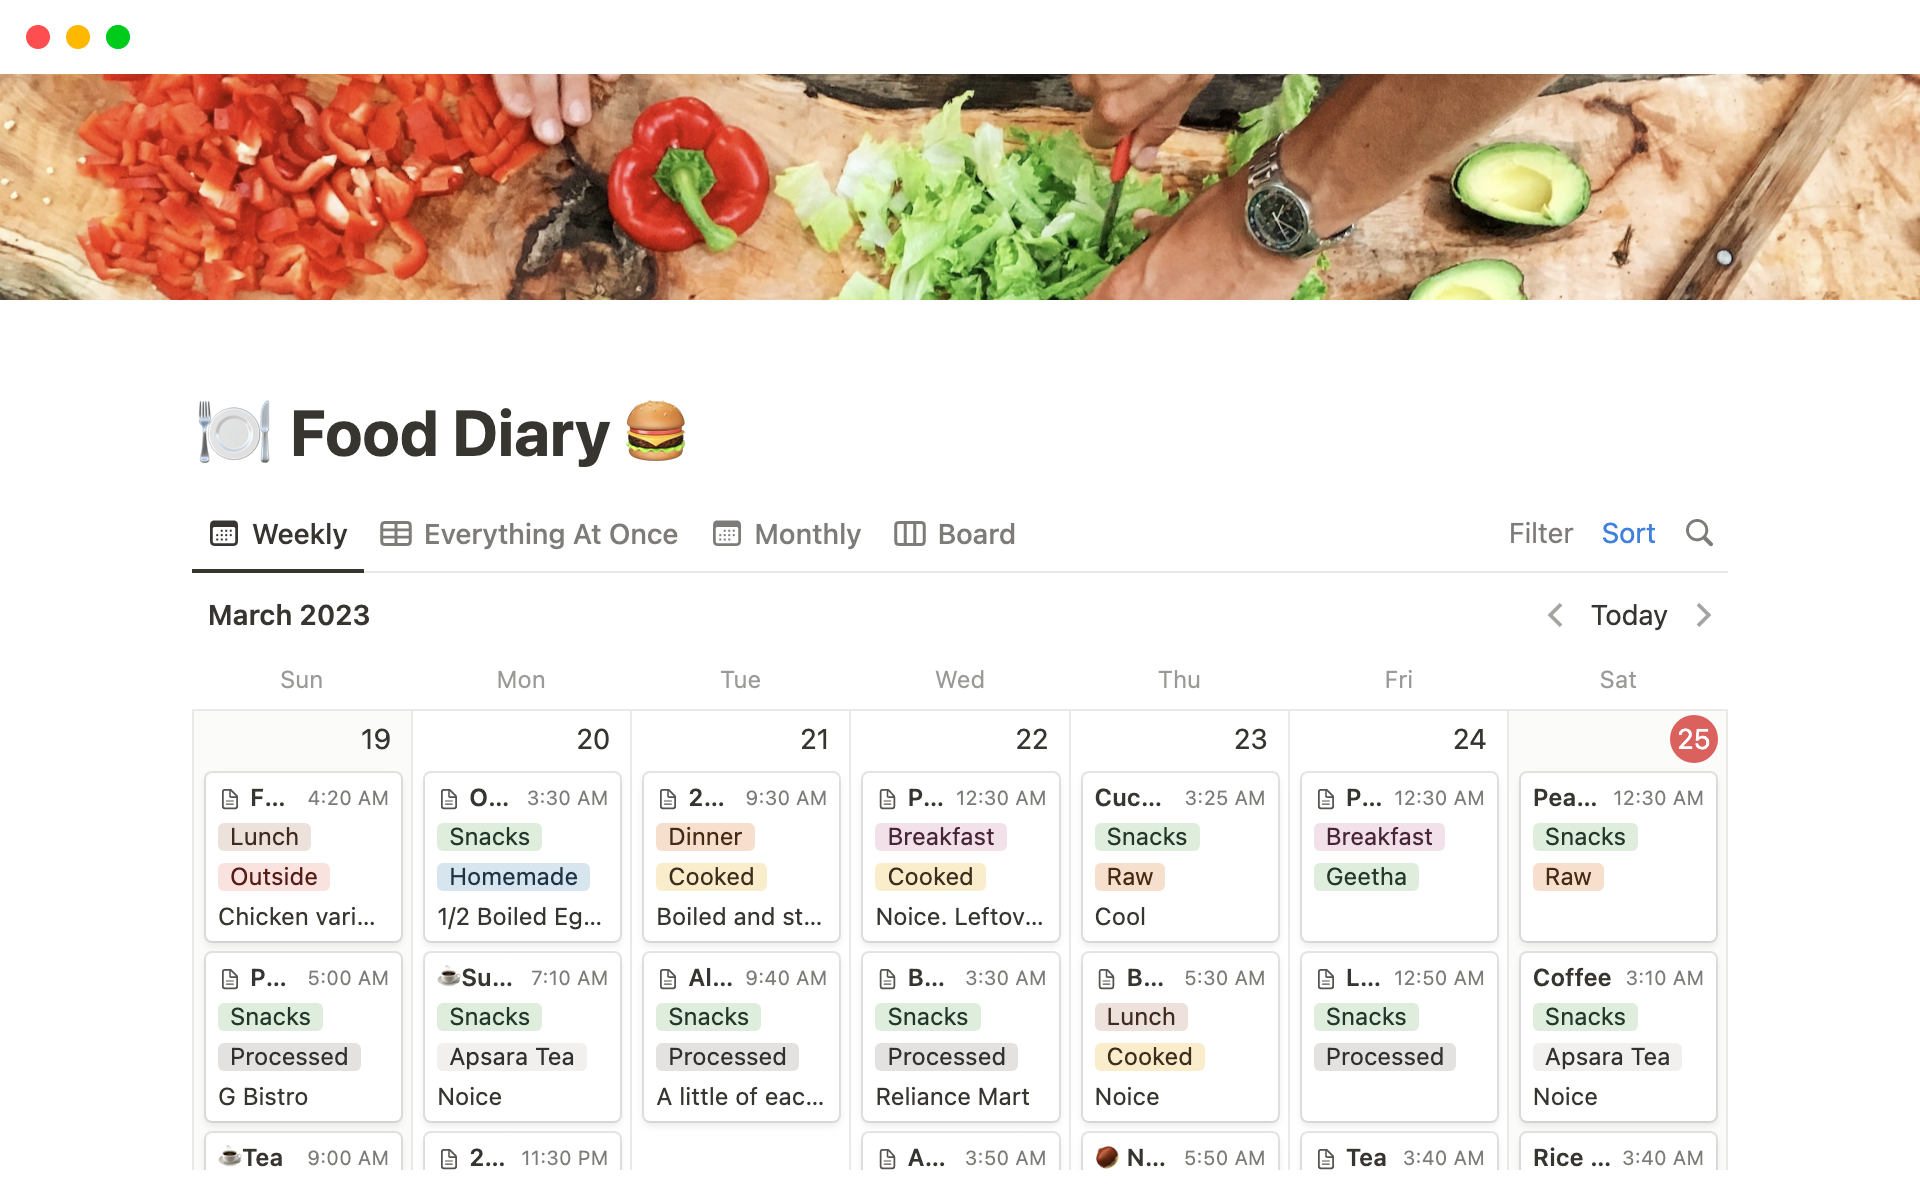 Provides a space for food journal entries and organizes them.